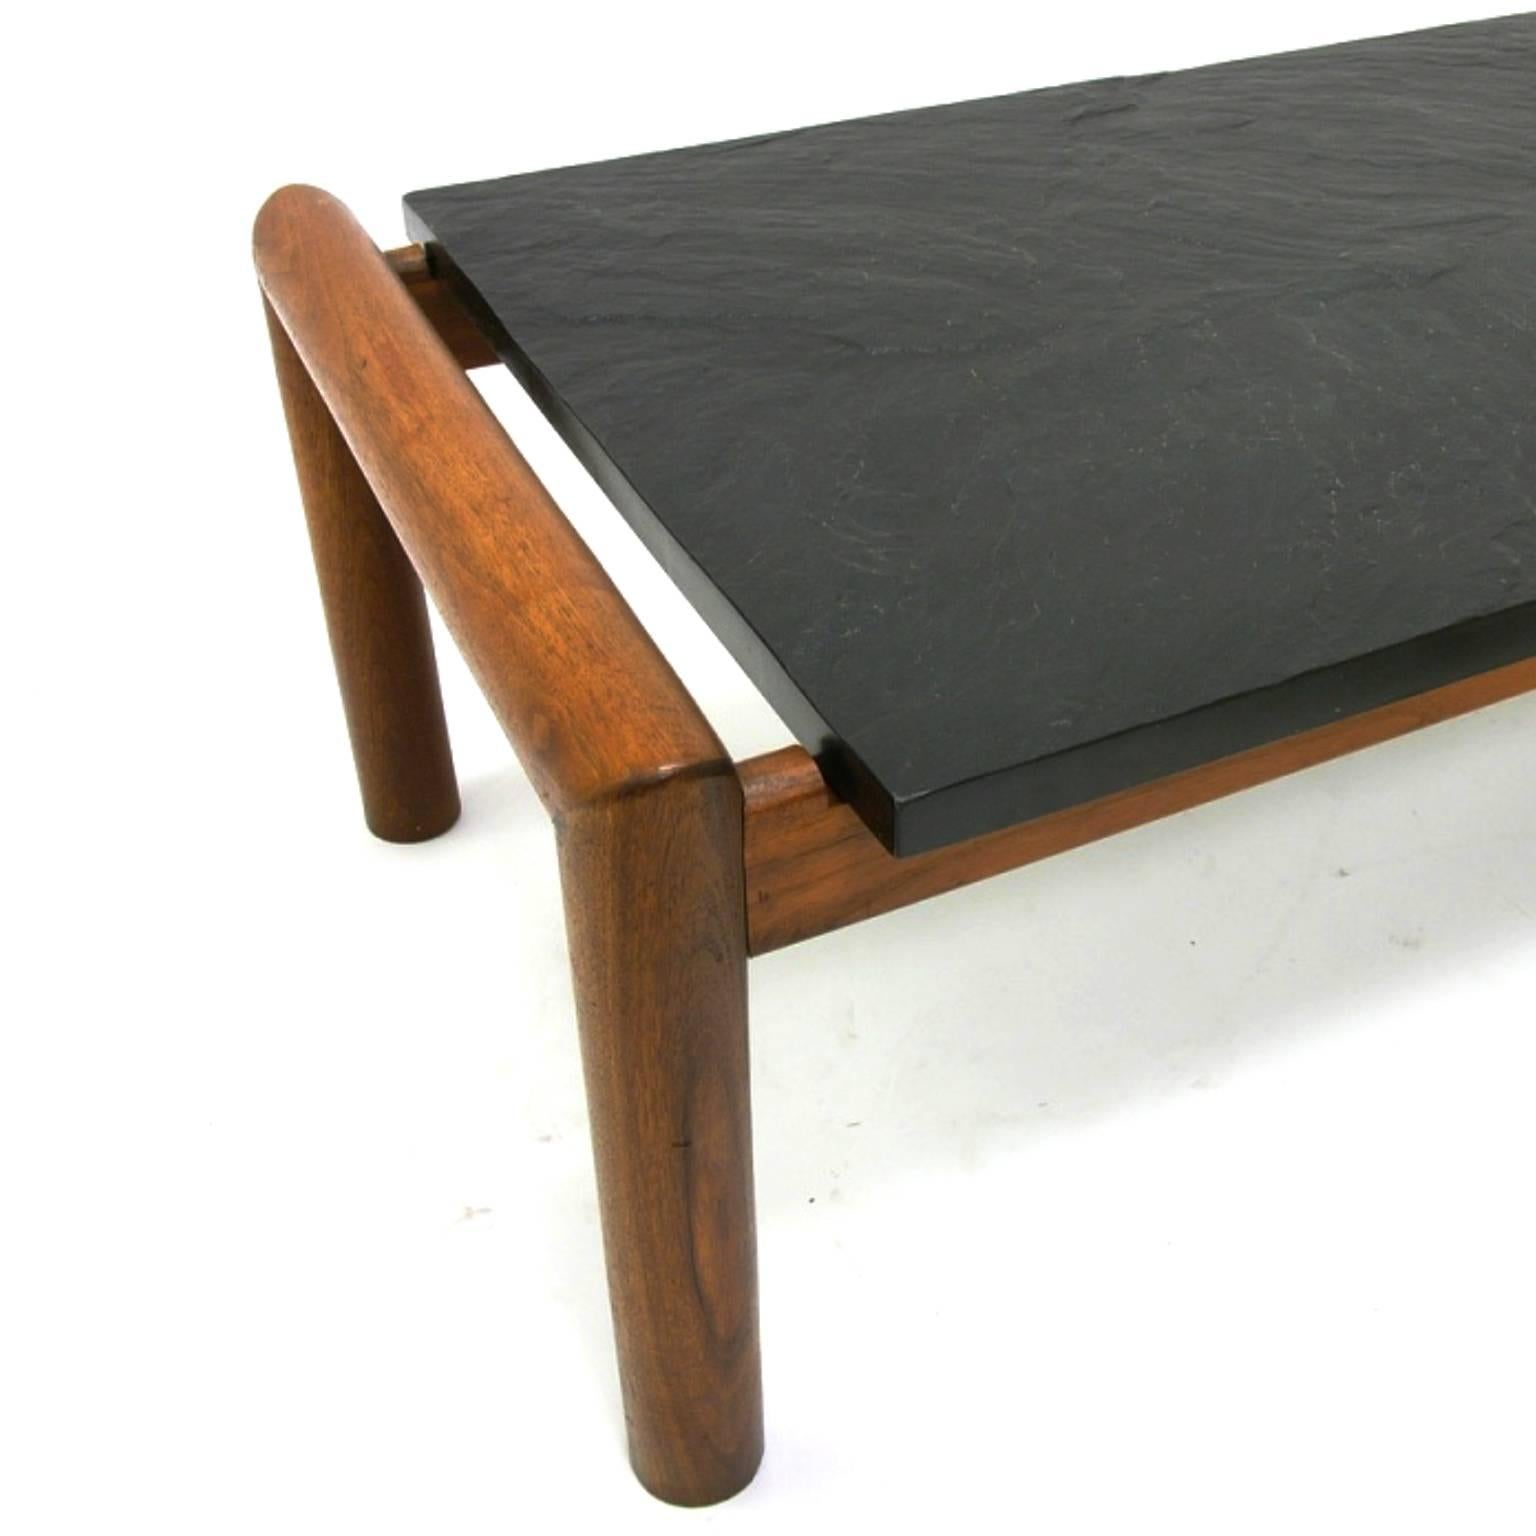 American Mid-Century Modern Brutalist Slate and Walnut Coffee Table by Adrian Pearsall For Sale